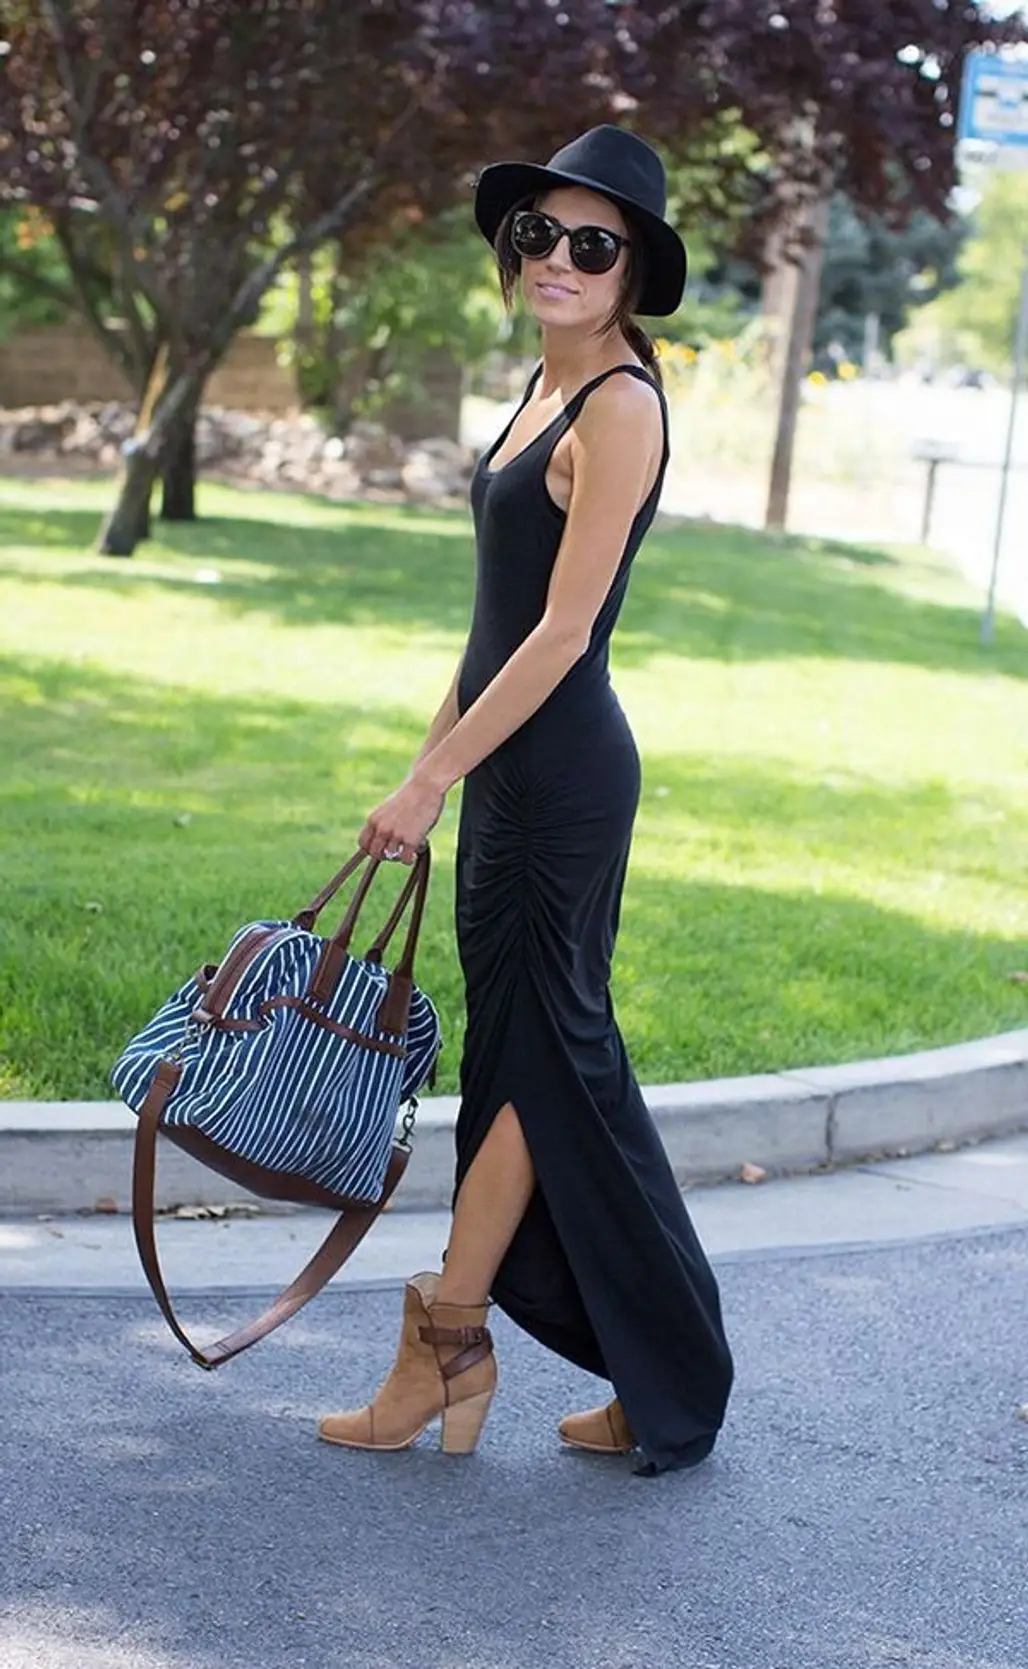 Ankle Boots Look Amazing with a Maxi Skirt